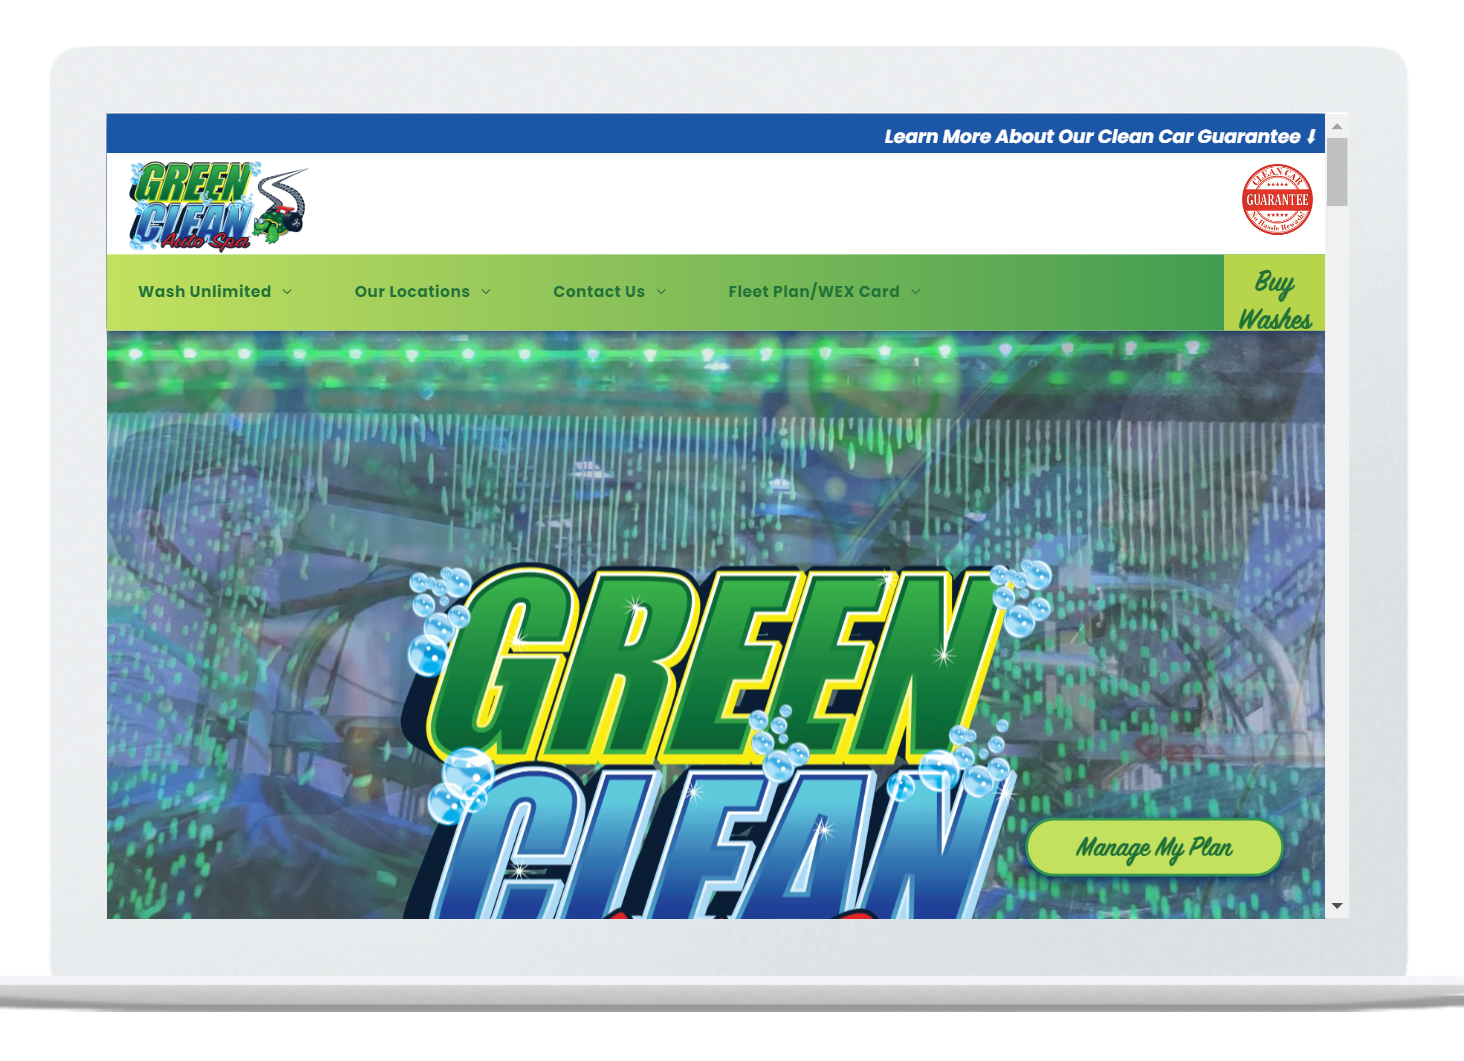 Green Clean Auto Spa carwash website. Camp Lejeune, South Carolina owned by John Hunter. Website made by OhmCo, the best carwash websites in the wash and water treatment industry